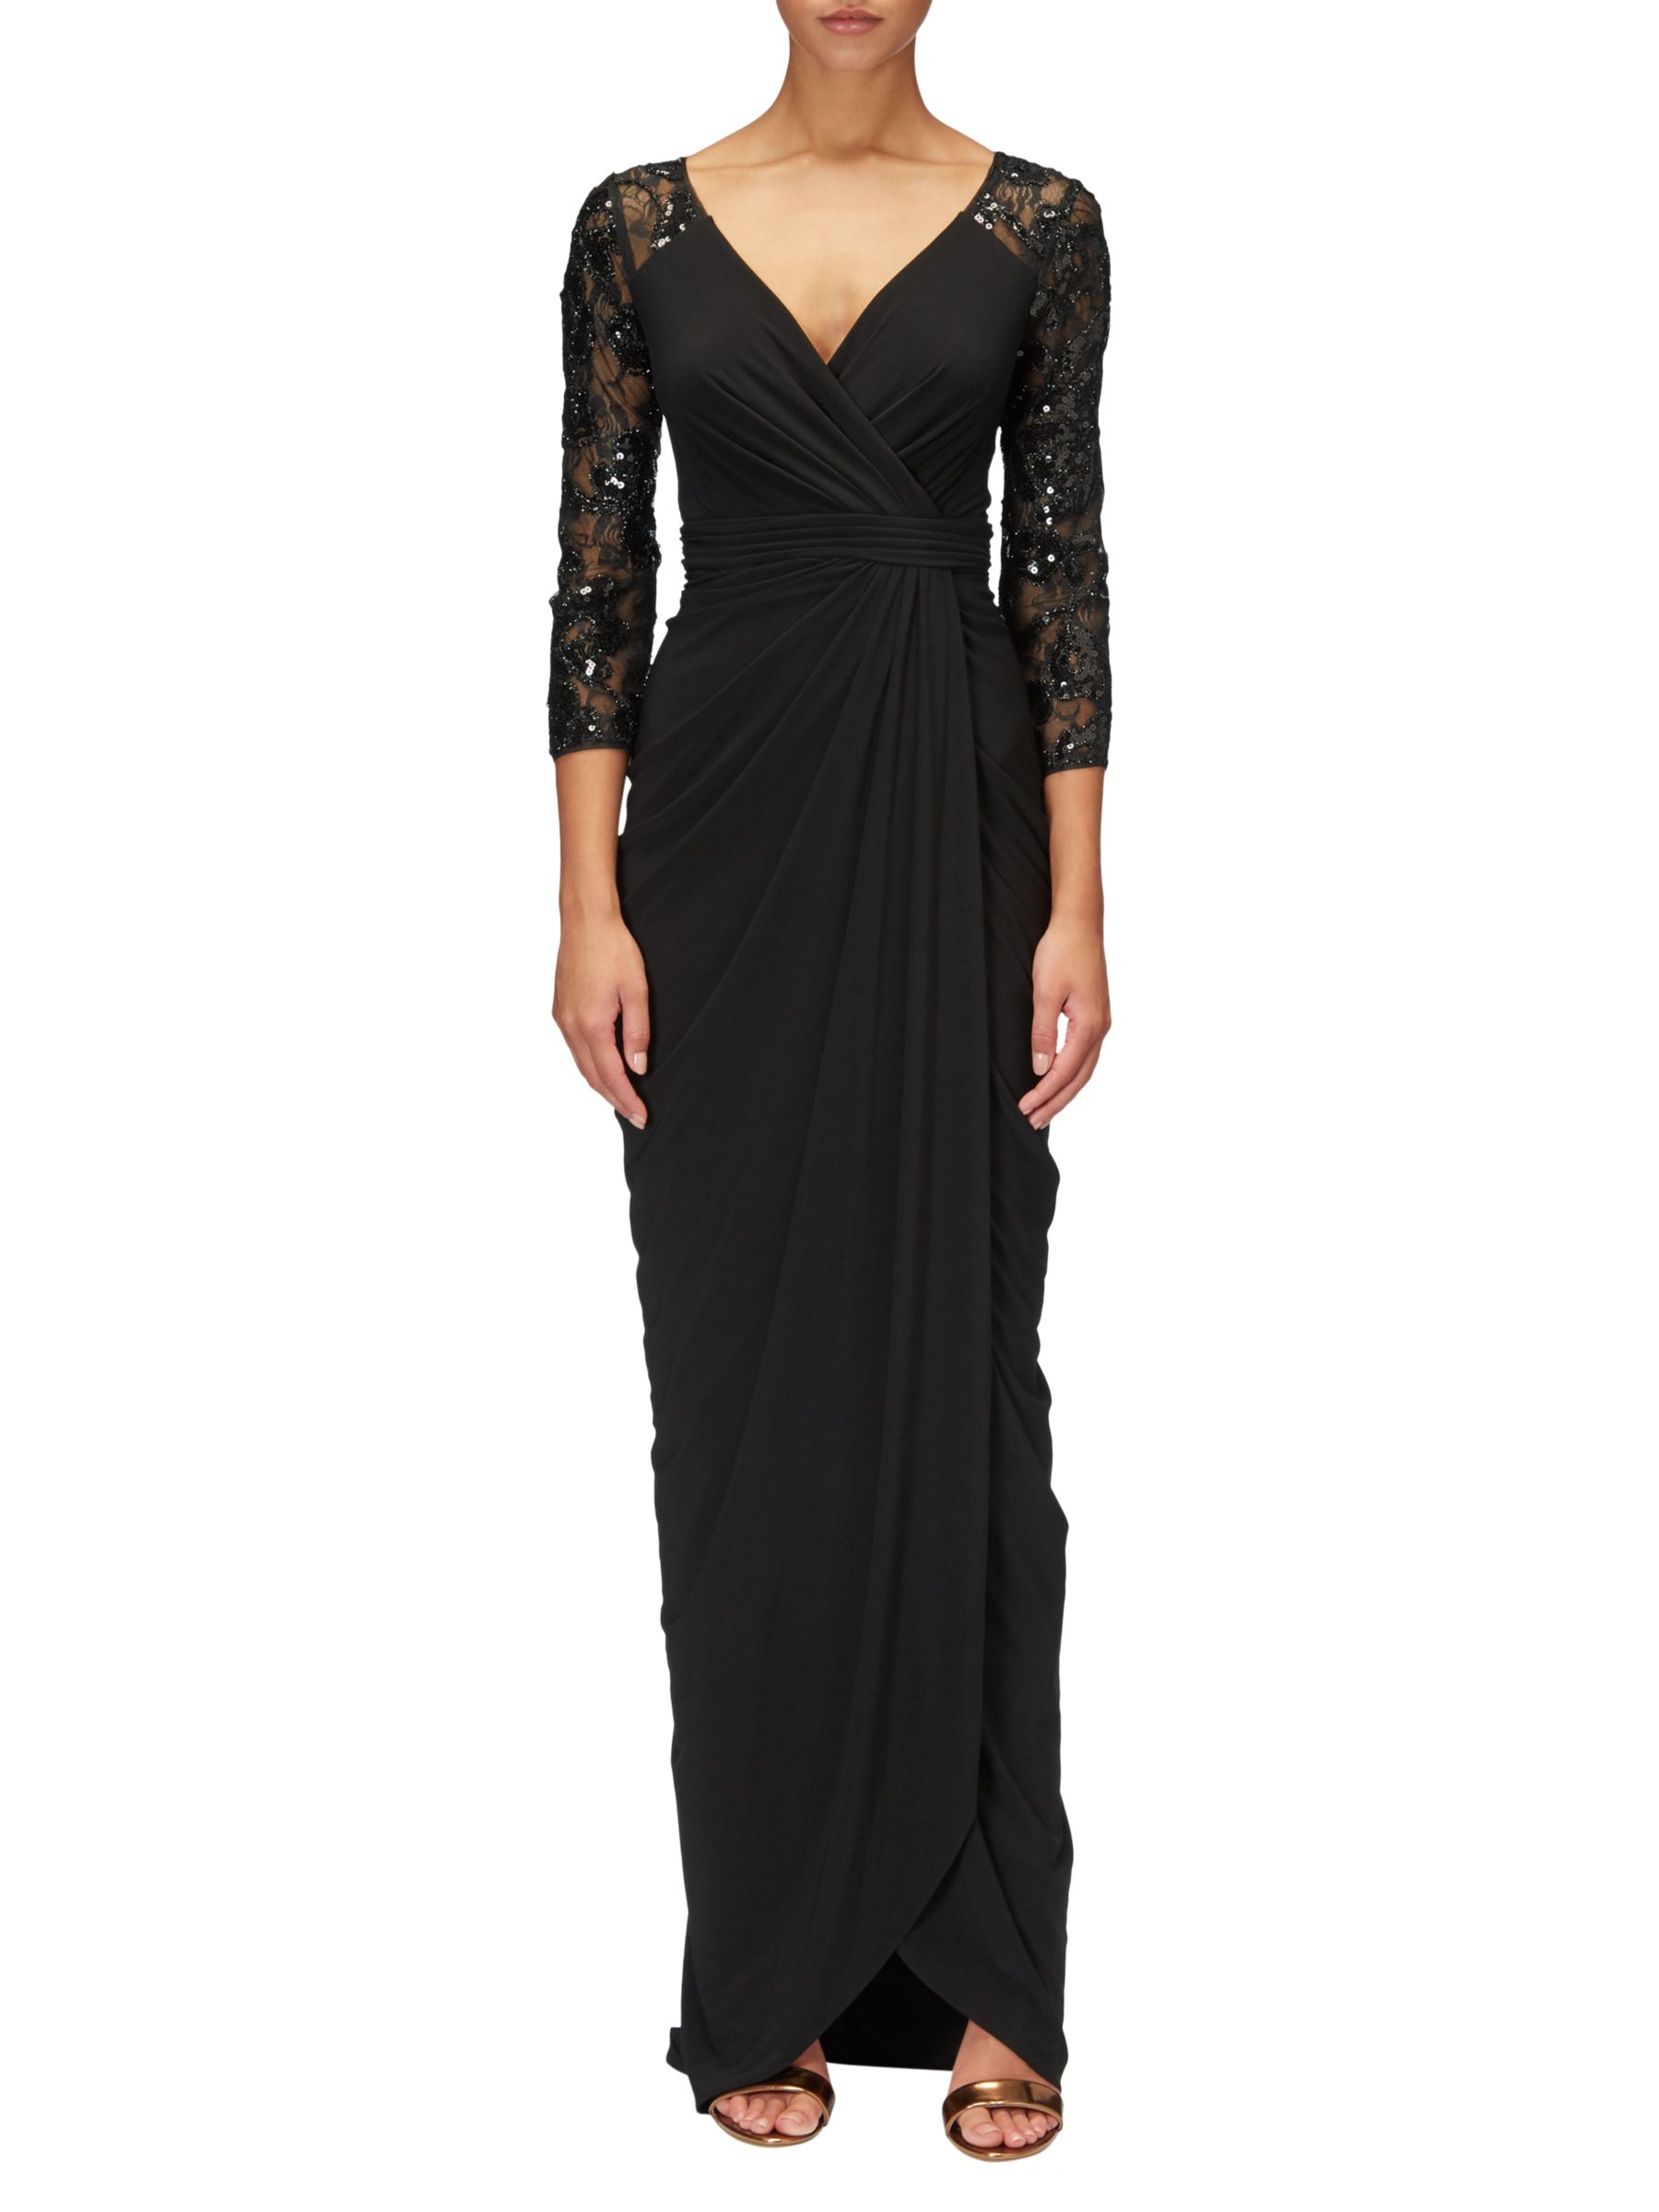 Adrianna Papell Long Lace Sleeved Dress Black At John Lewis And Partners 